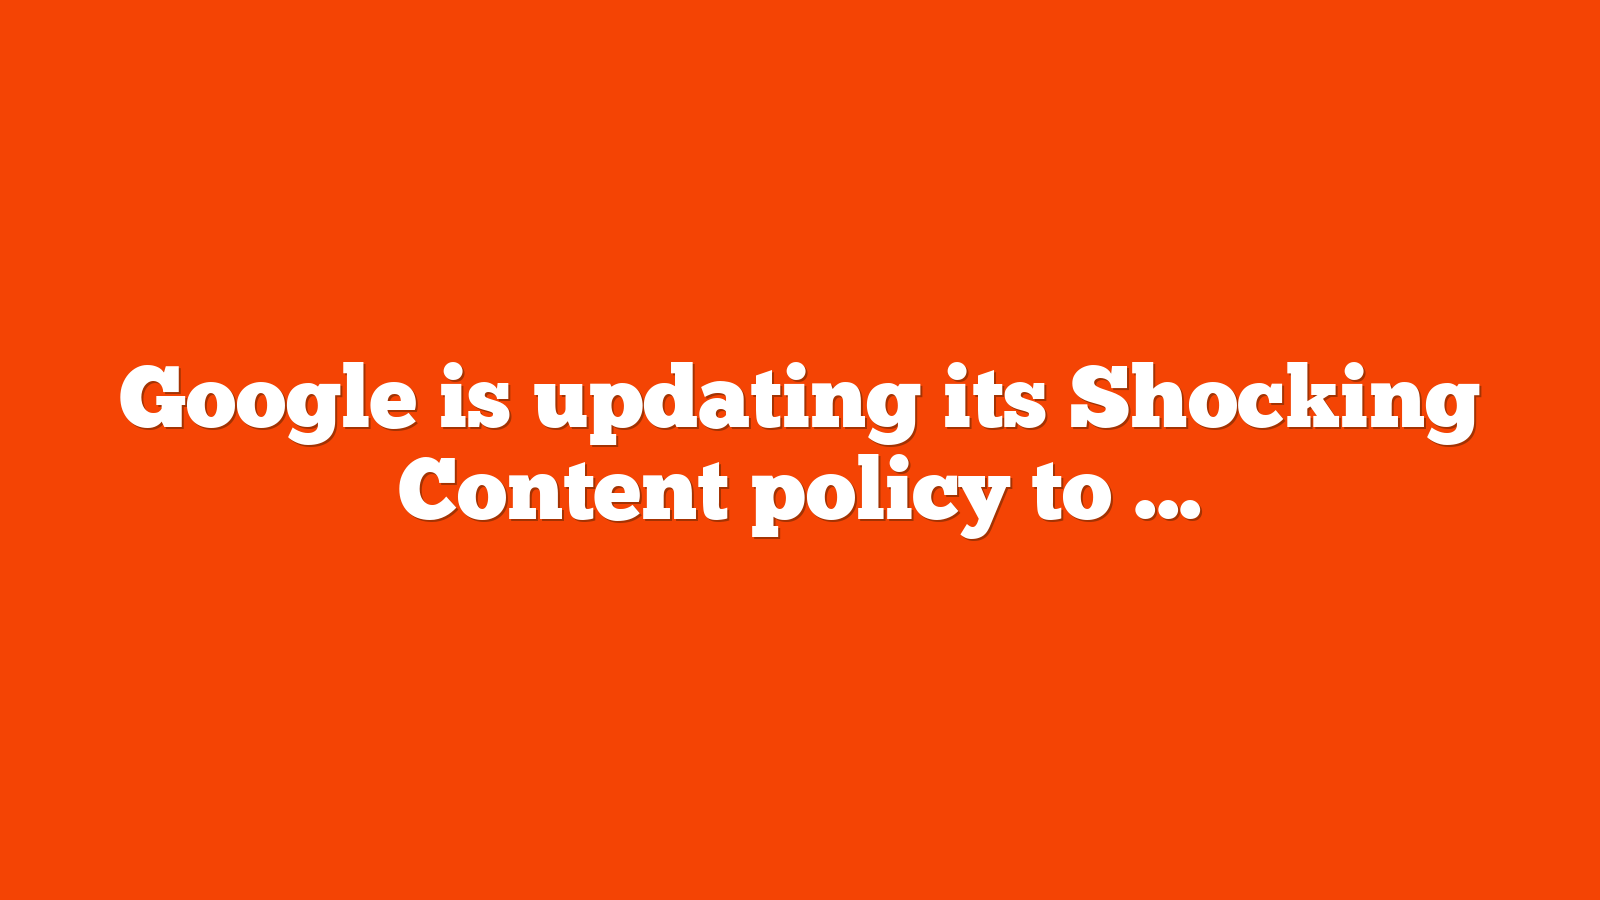 Google is updating its Shocking Content policy to exclude gameplay imagery